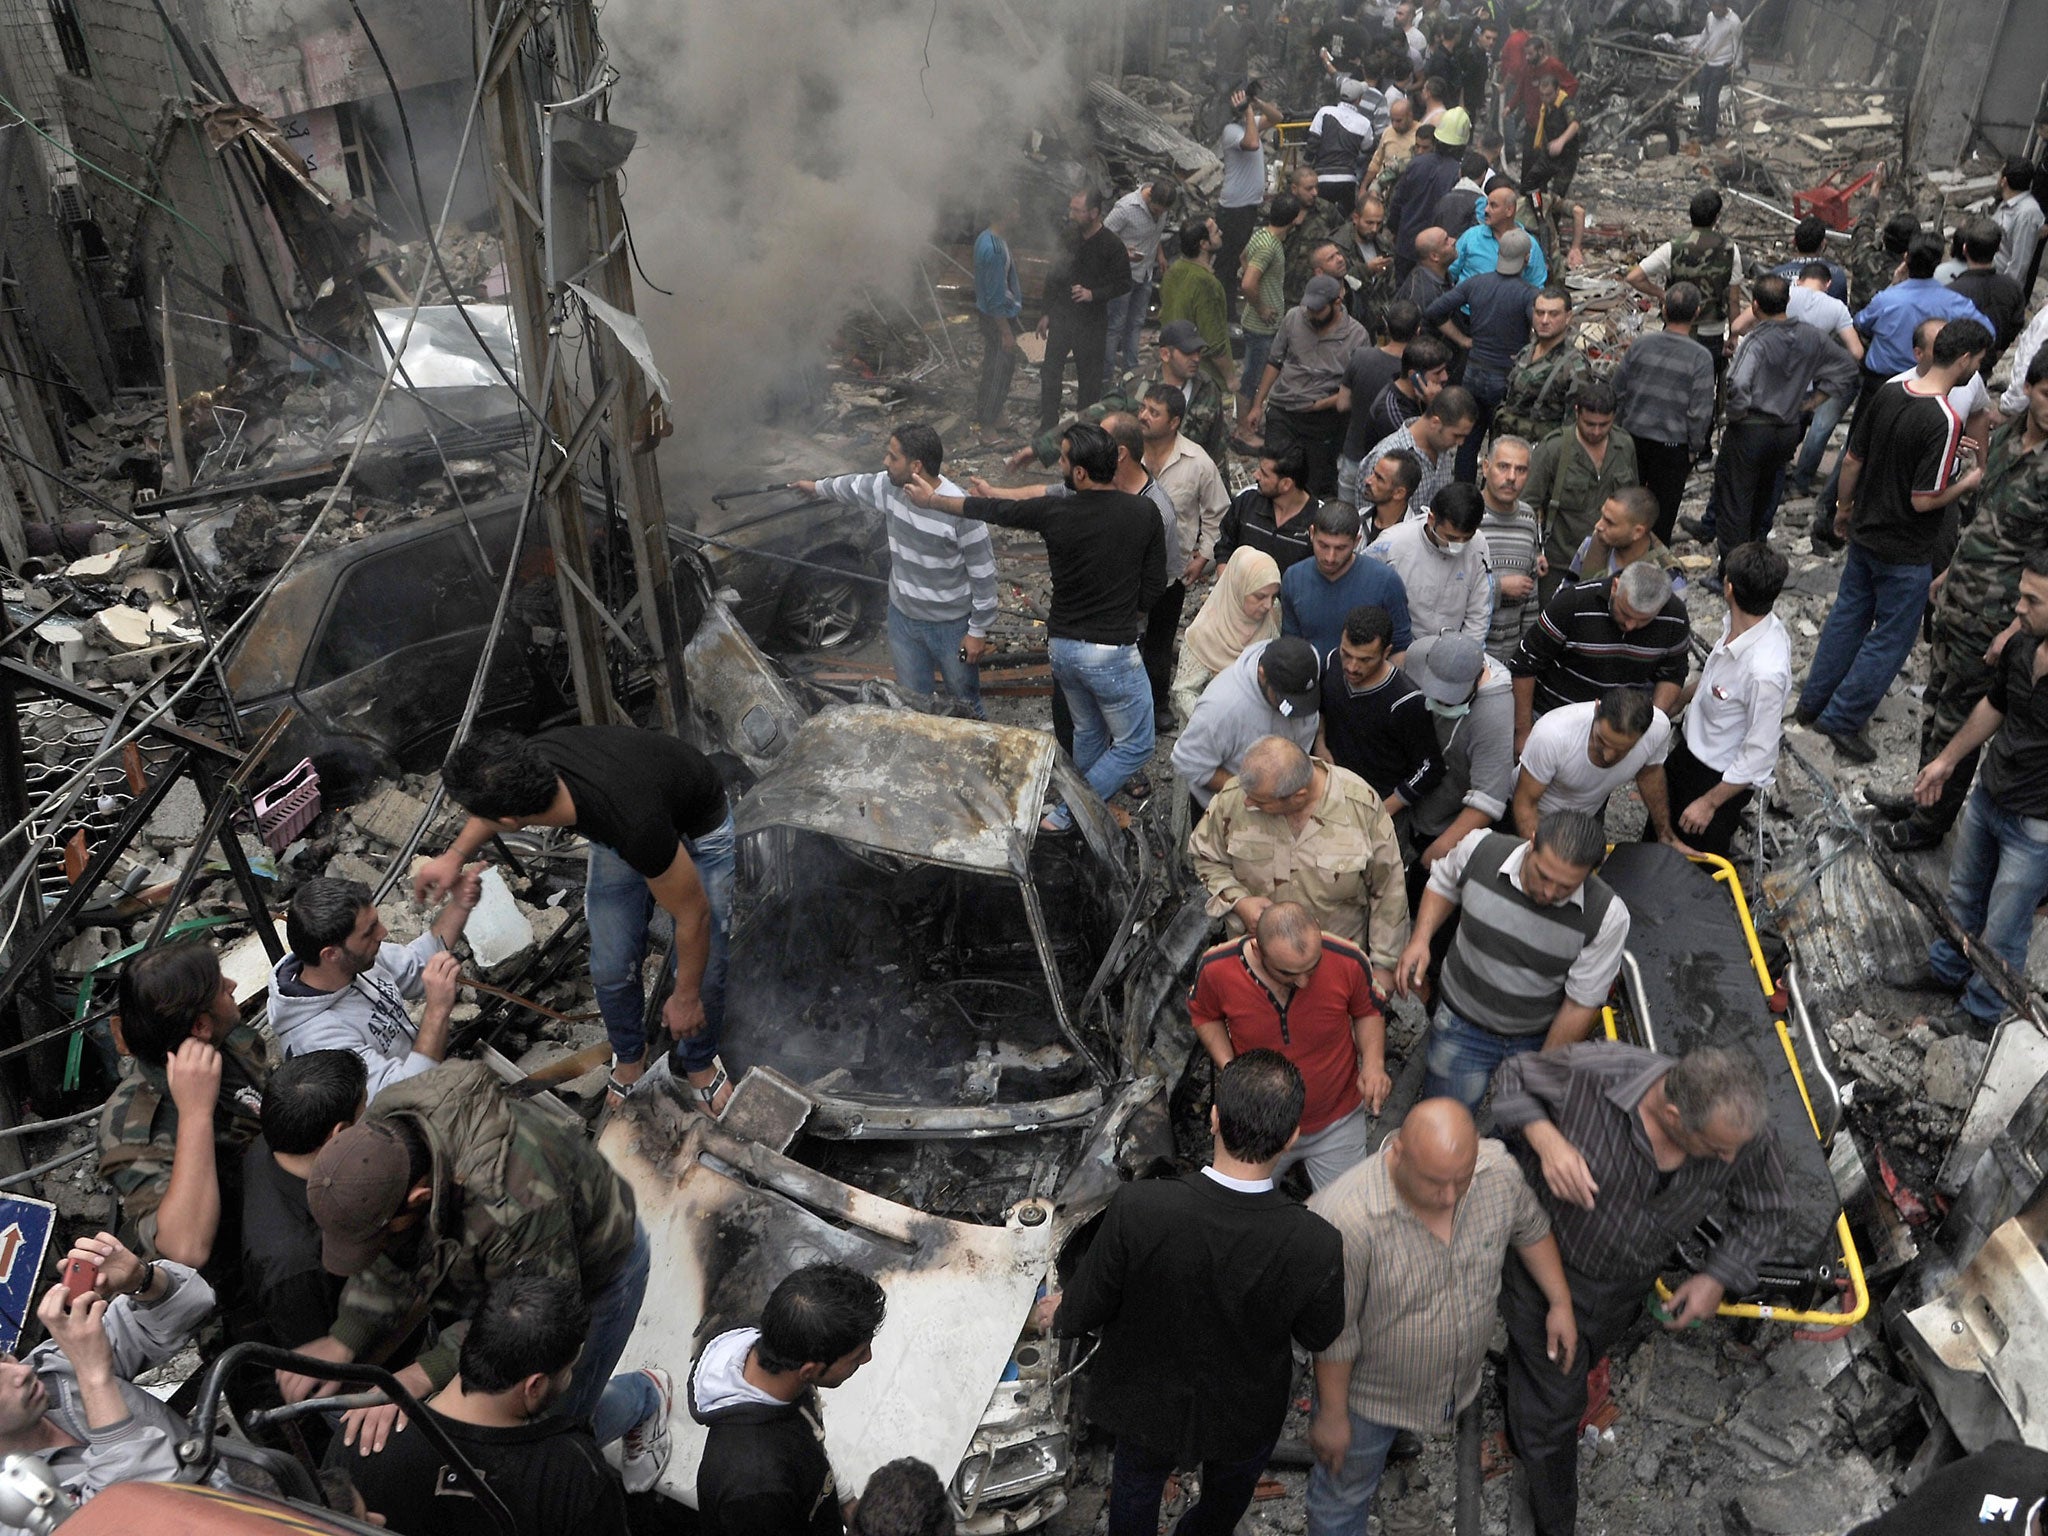 Syrians inspecting the site of an explosion in the Mazzeh district of the capital Damascus.